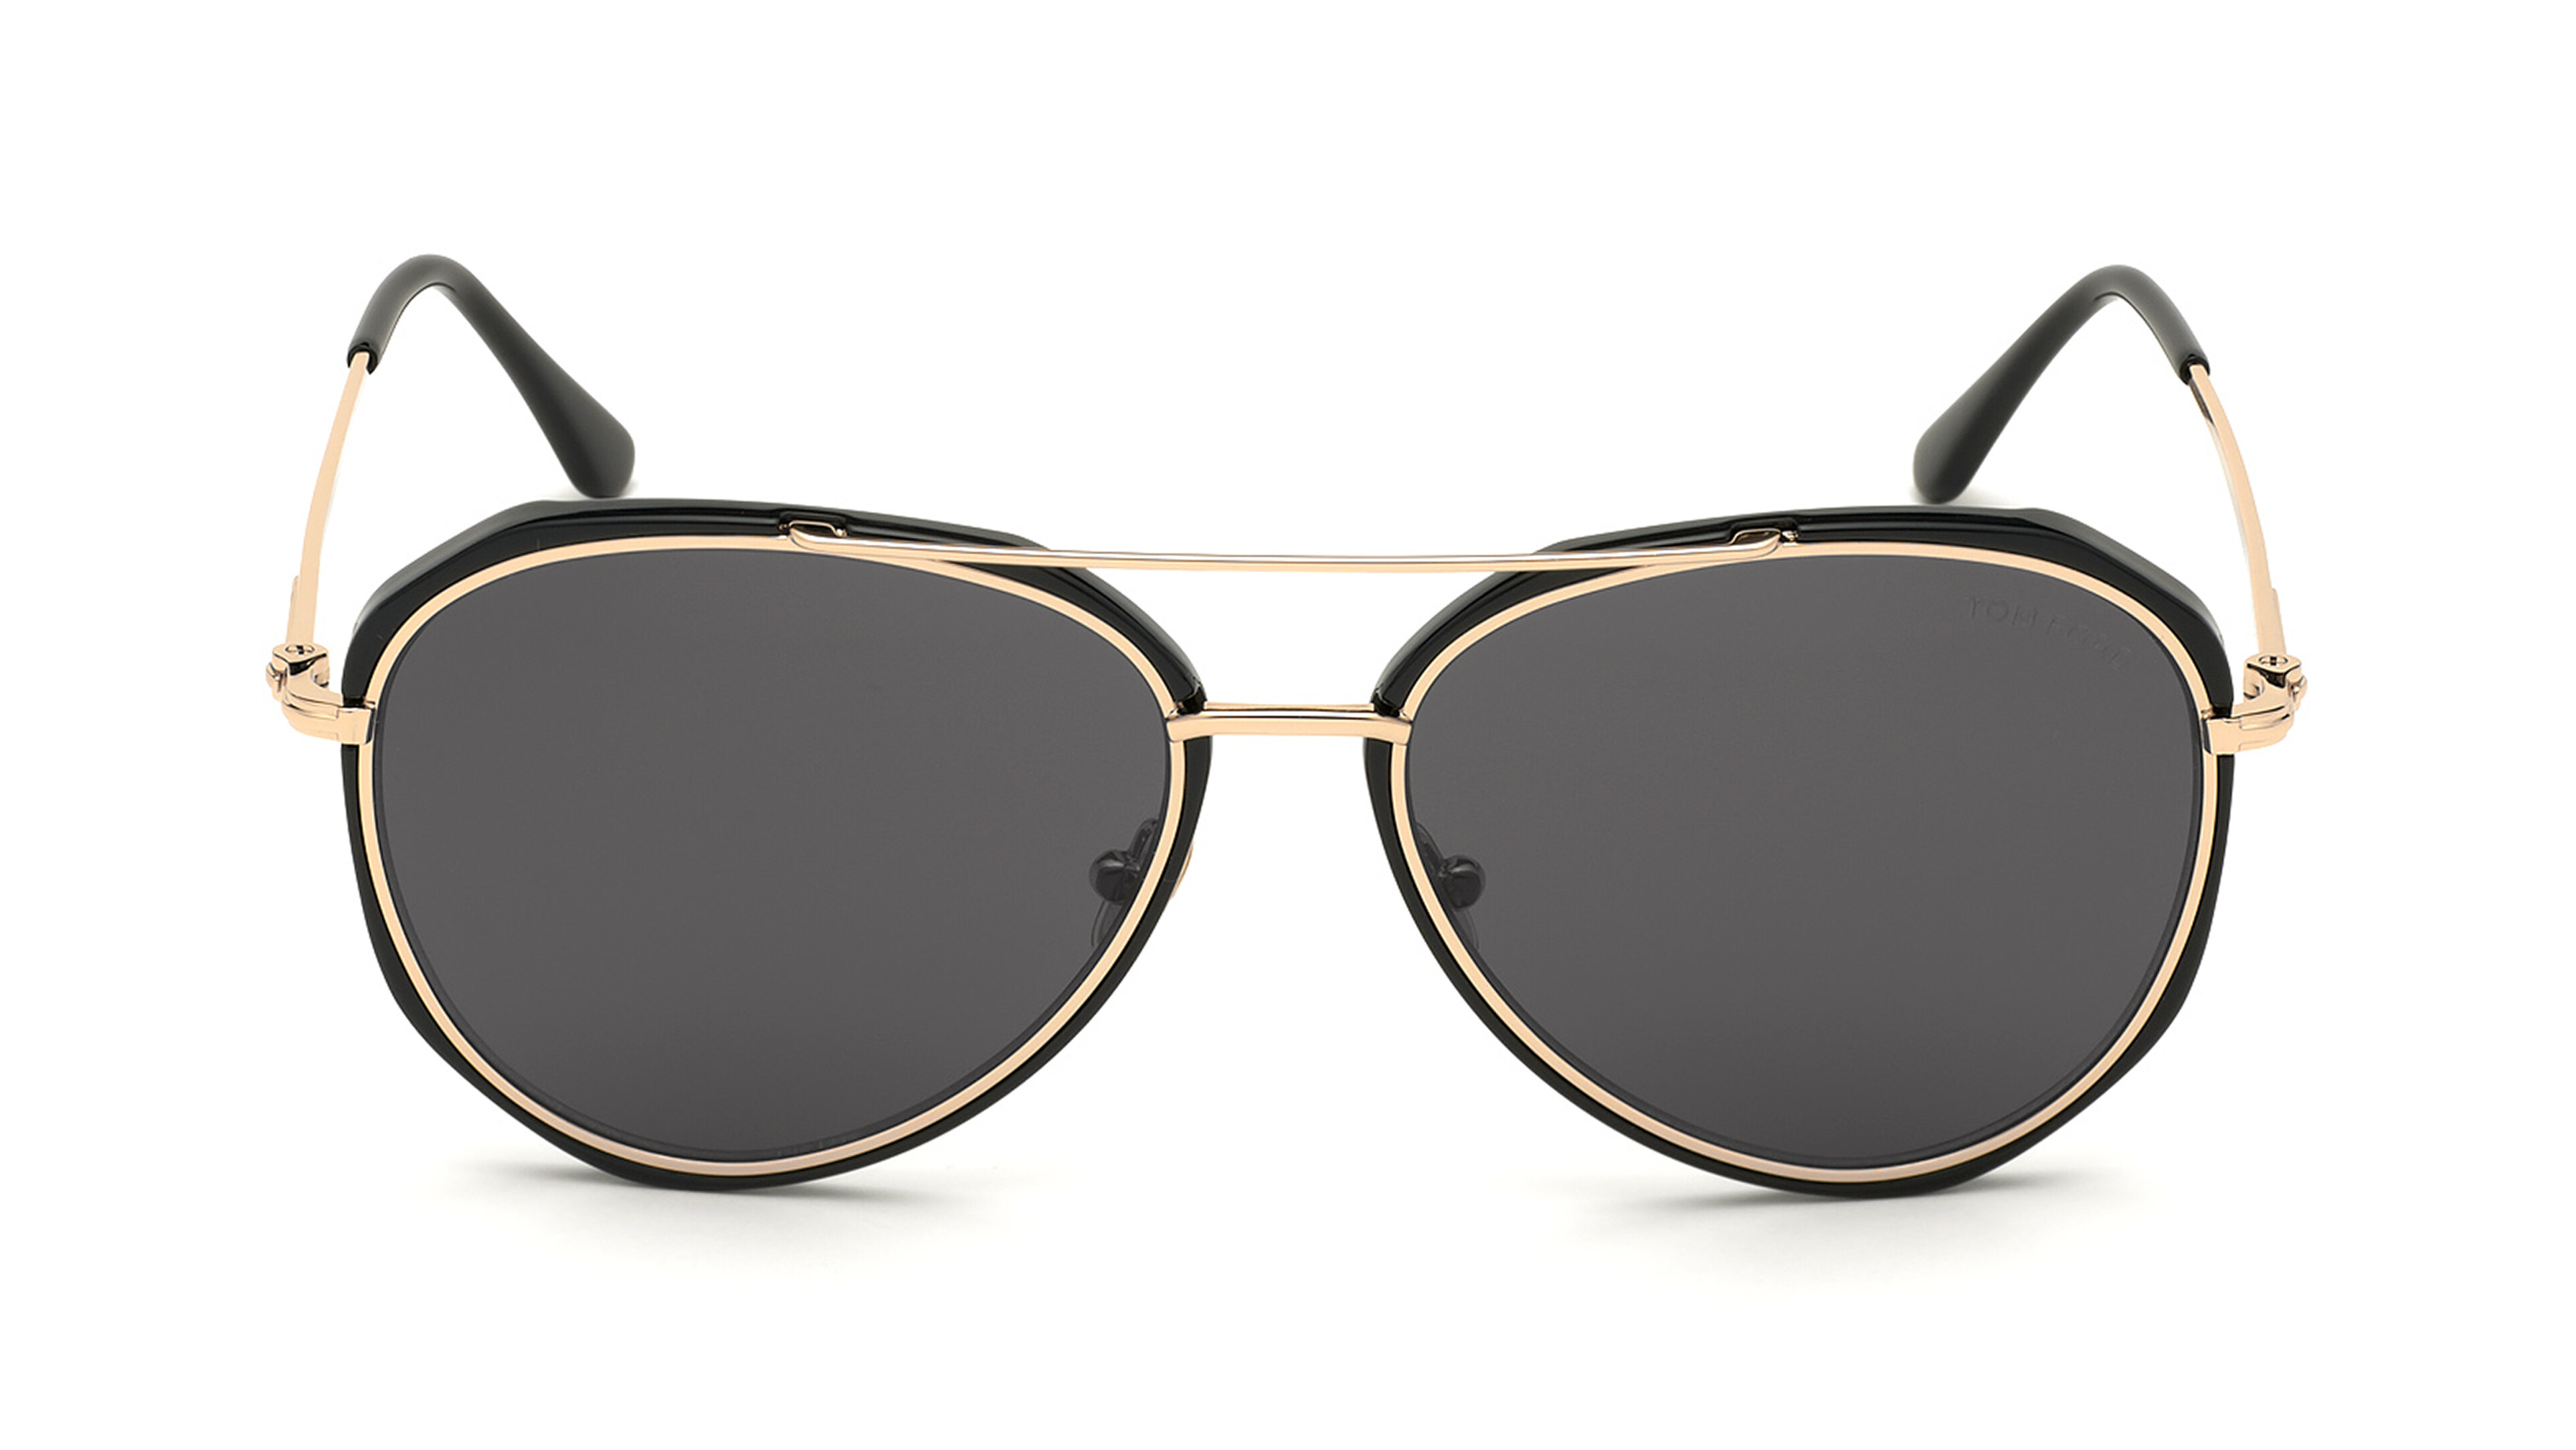 [products.image.front] Tom Ford FT0749 01A Sonnenbrille